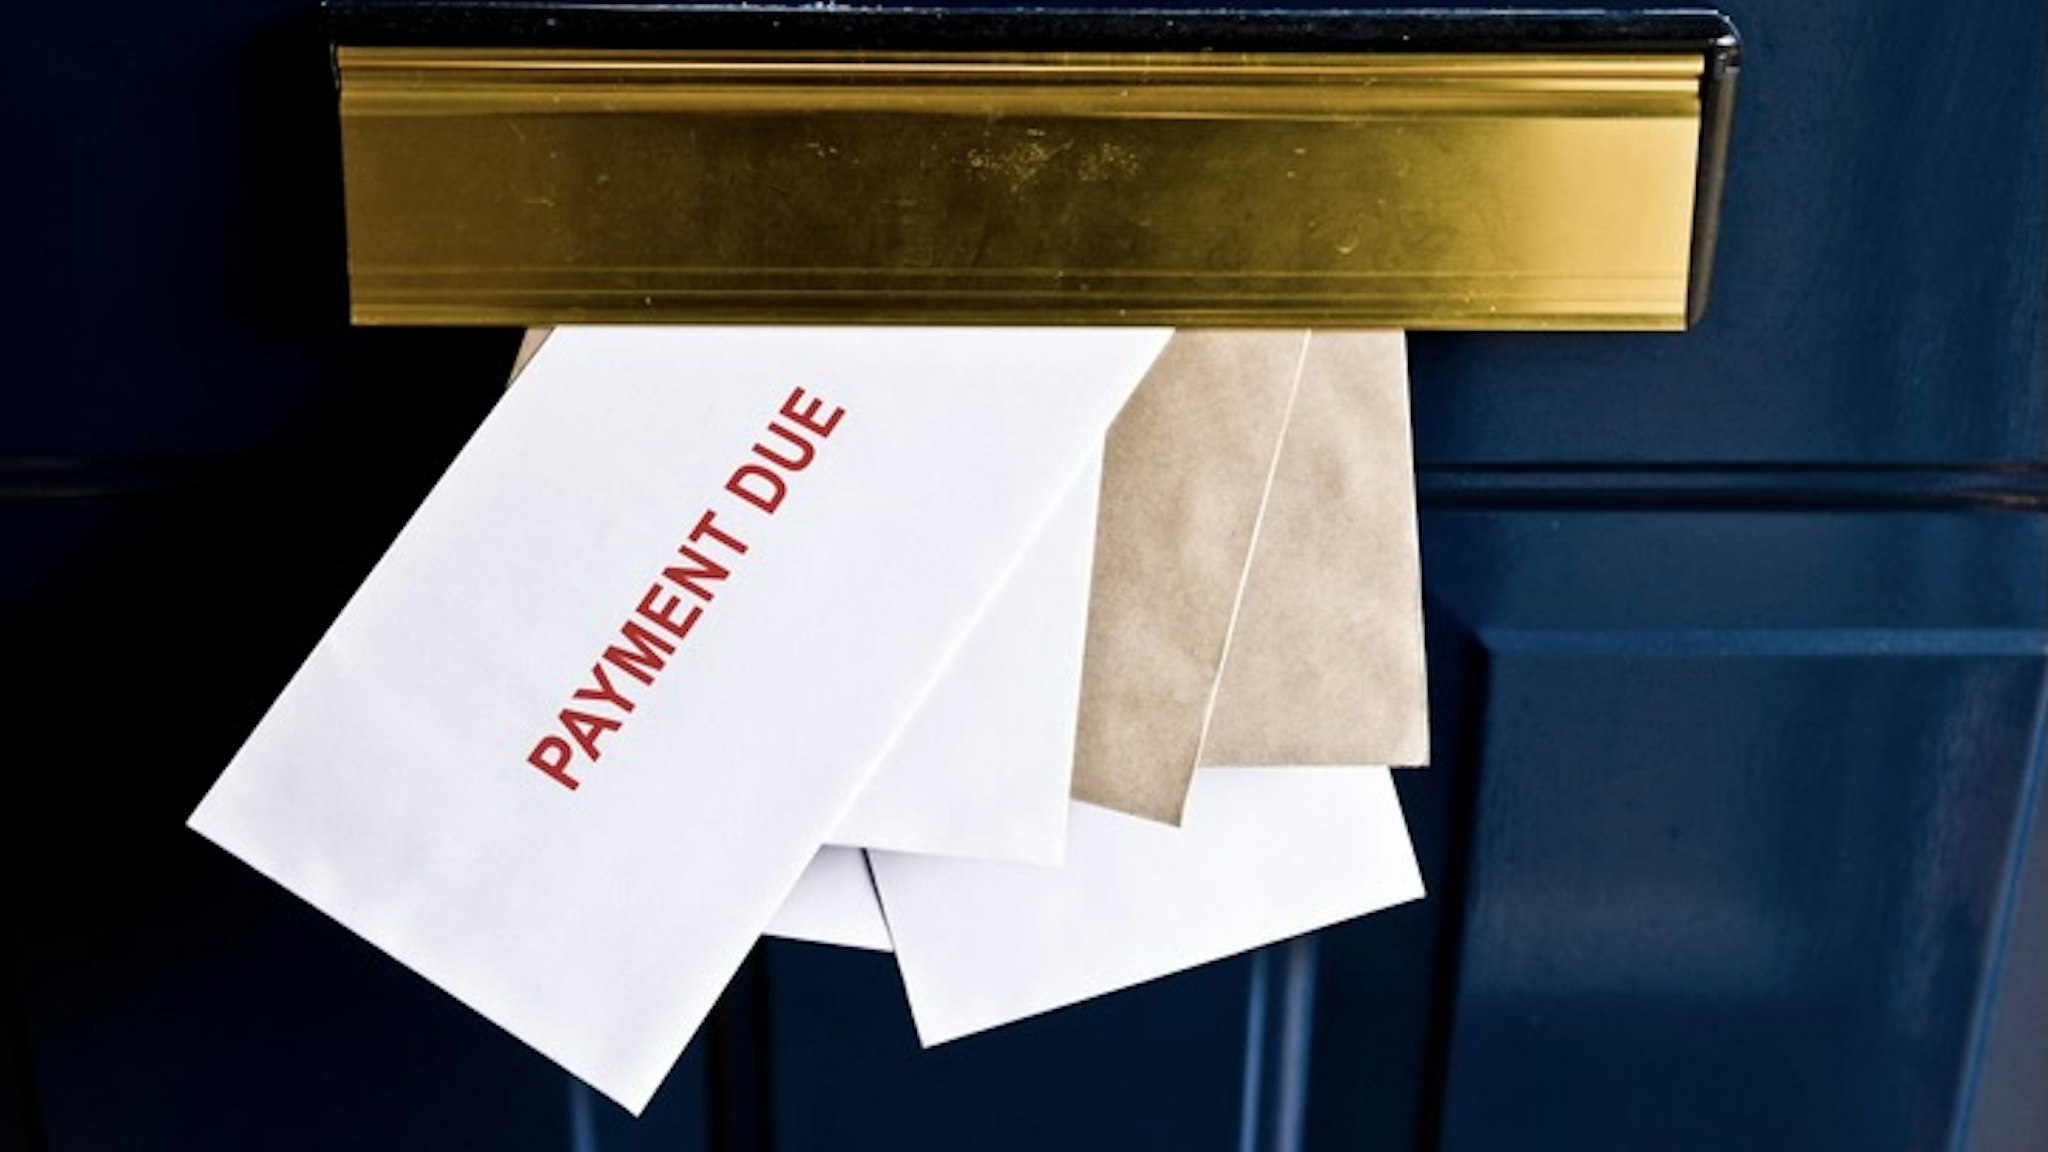 Payment due - stock photo Letters in letterbox saying payment due SEAN GLADWELL via Getty Images